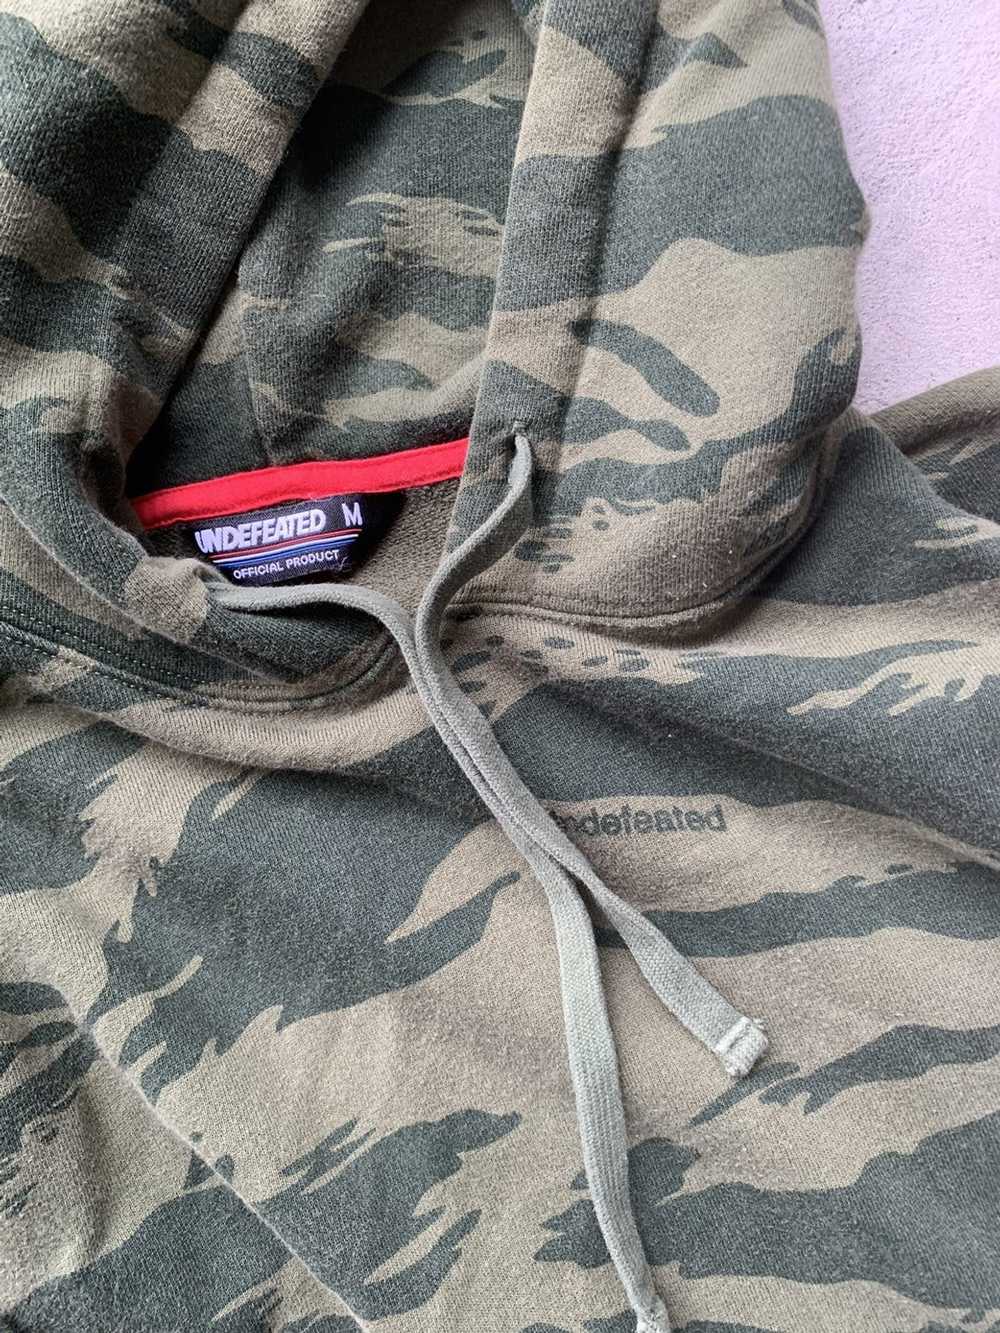 Undefeated Undefeated all over Camo hoodie - image 3